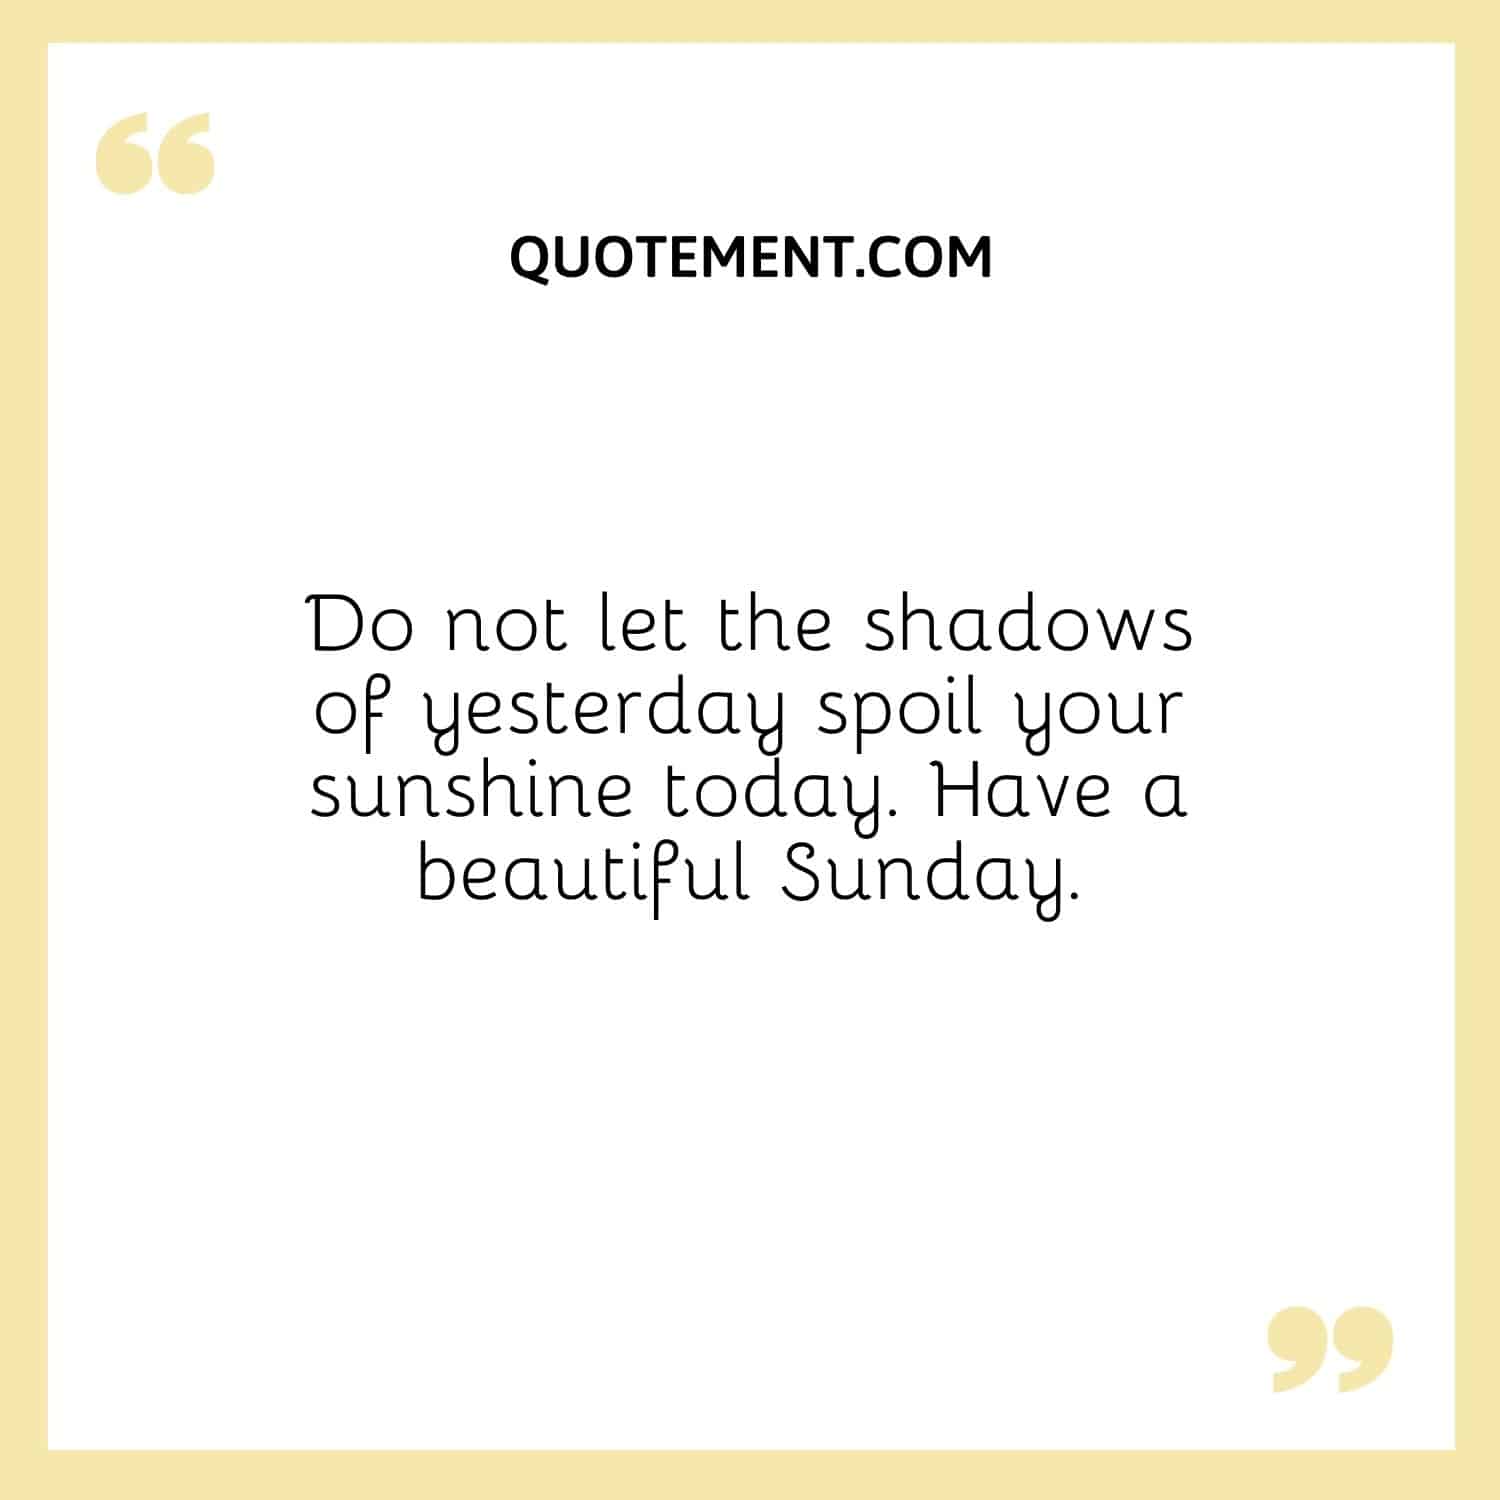 Do not let the shadows of yesterday spoil your sunshine today.